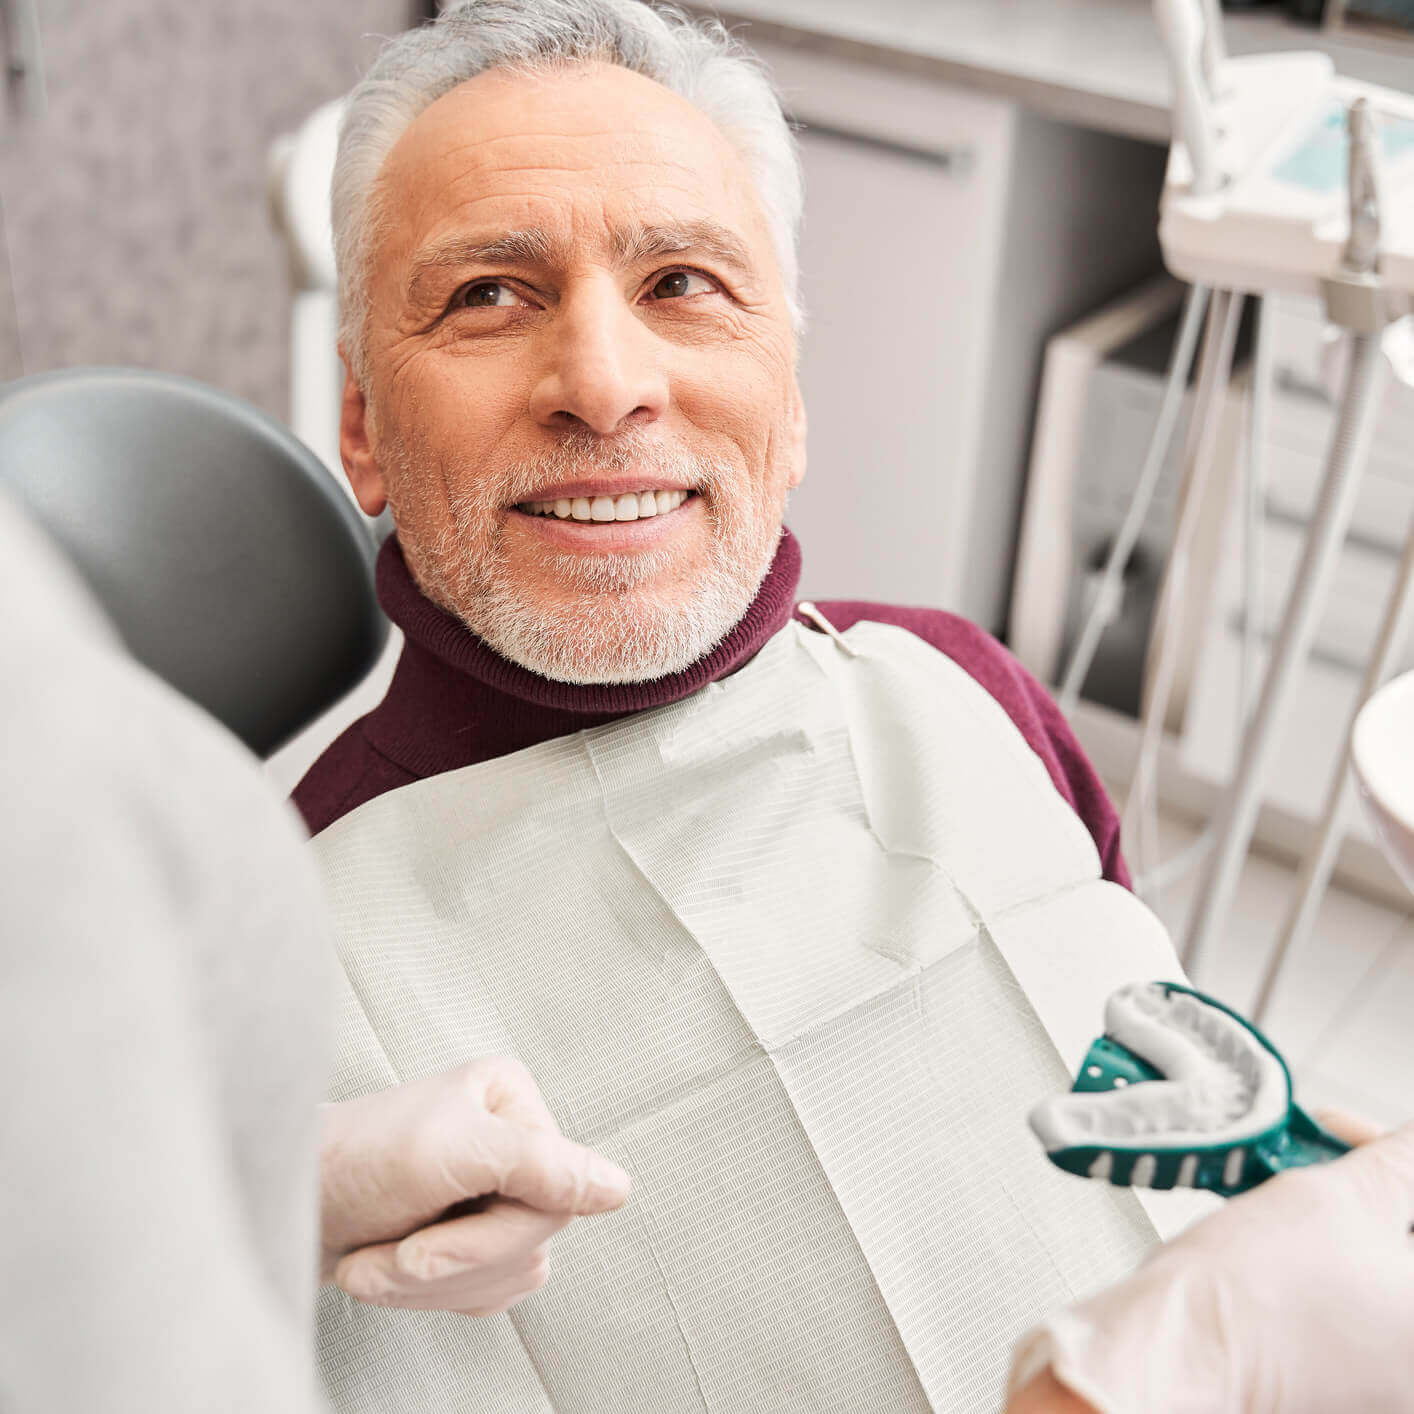 Patient is looking happy to get done his work done by dentist.